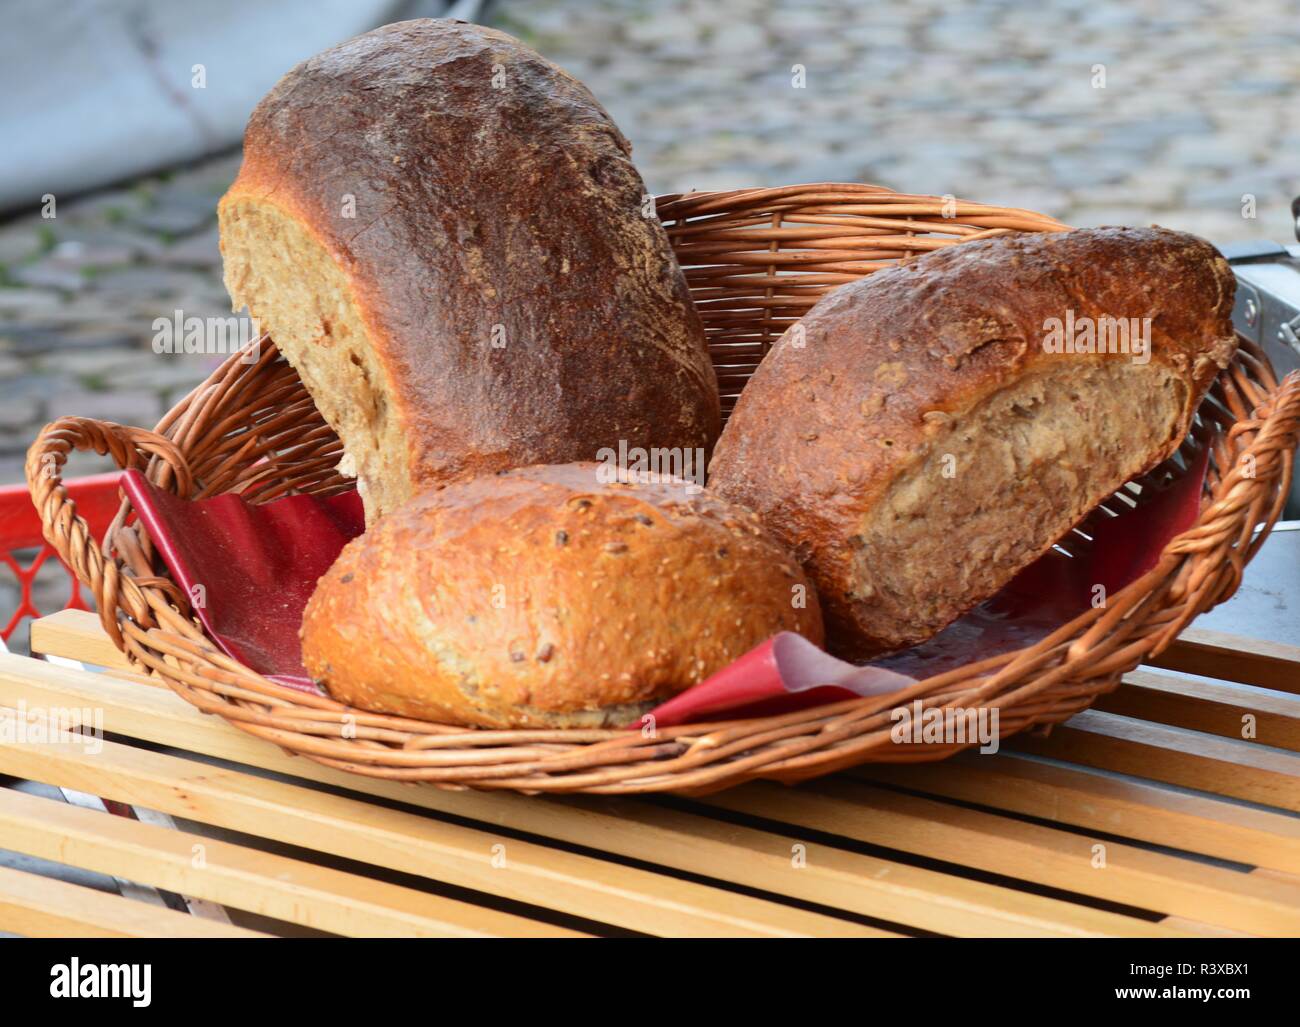 Holzofenbrot High Resolution Stock Photography and Images - Alamy